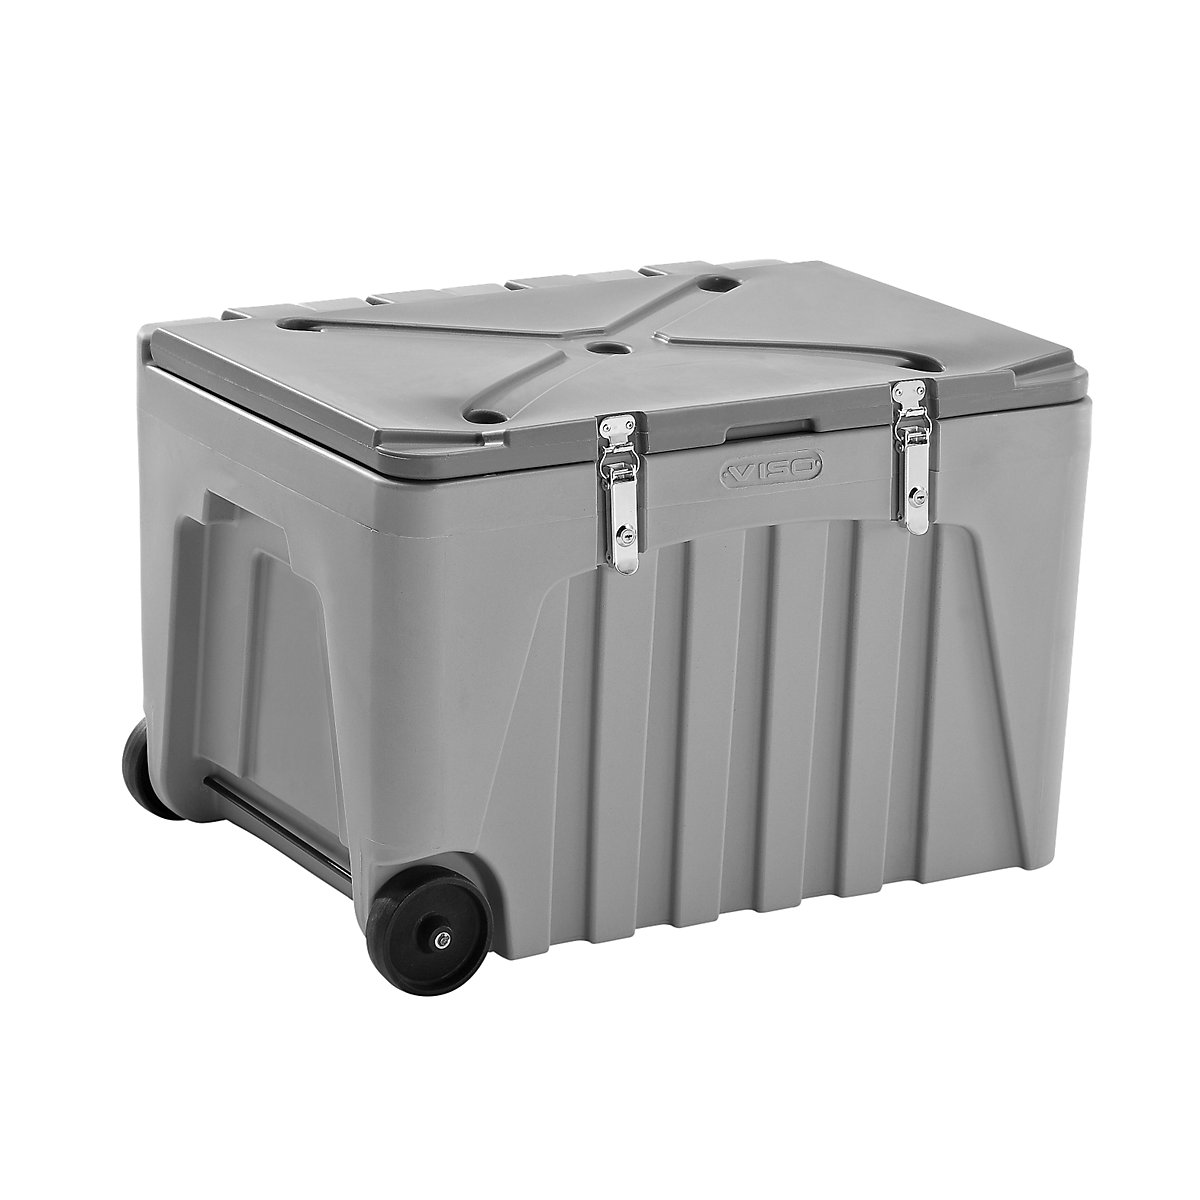 Universal container – VISO, made of polypropylene, with lock at the side, capacity 264 l-6